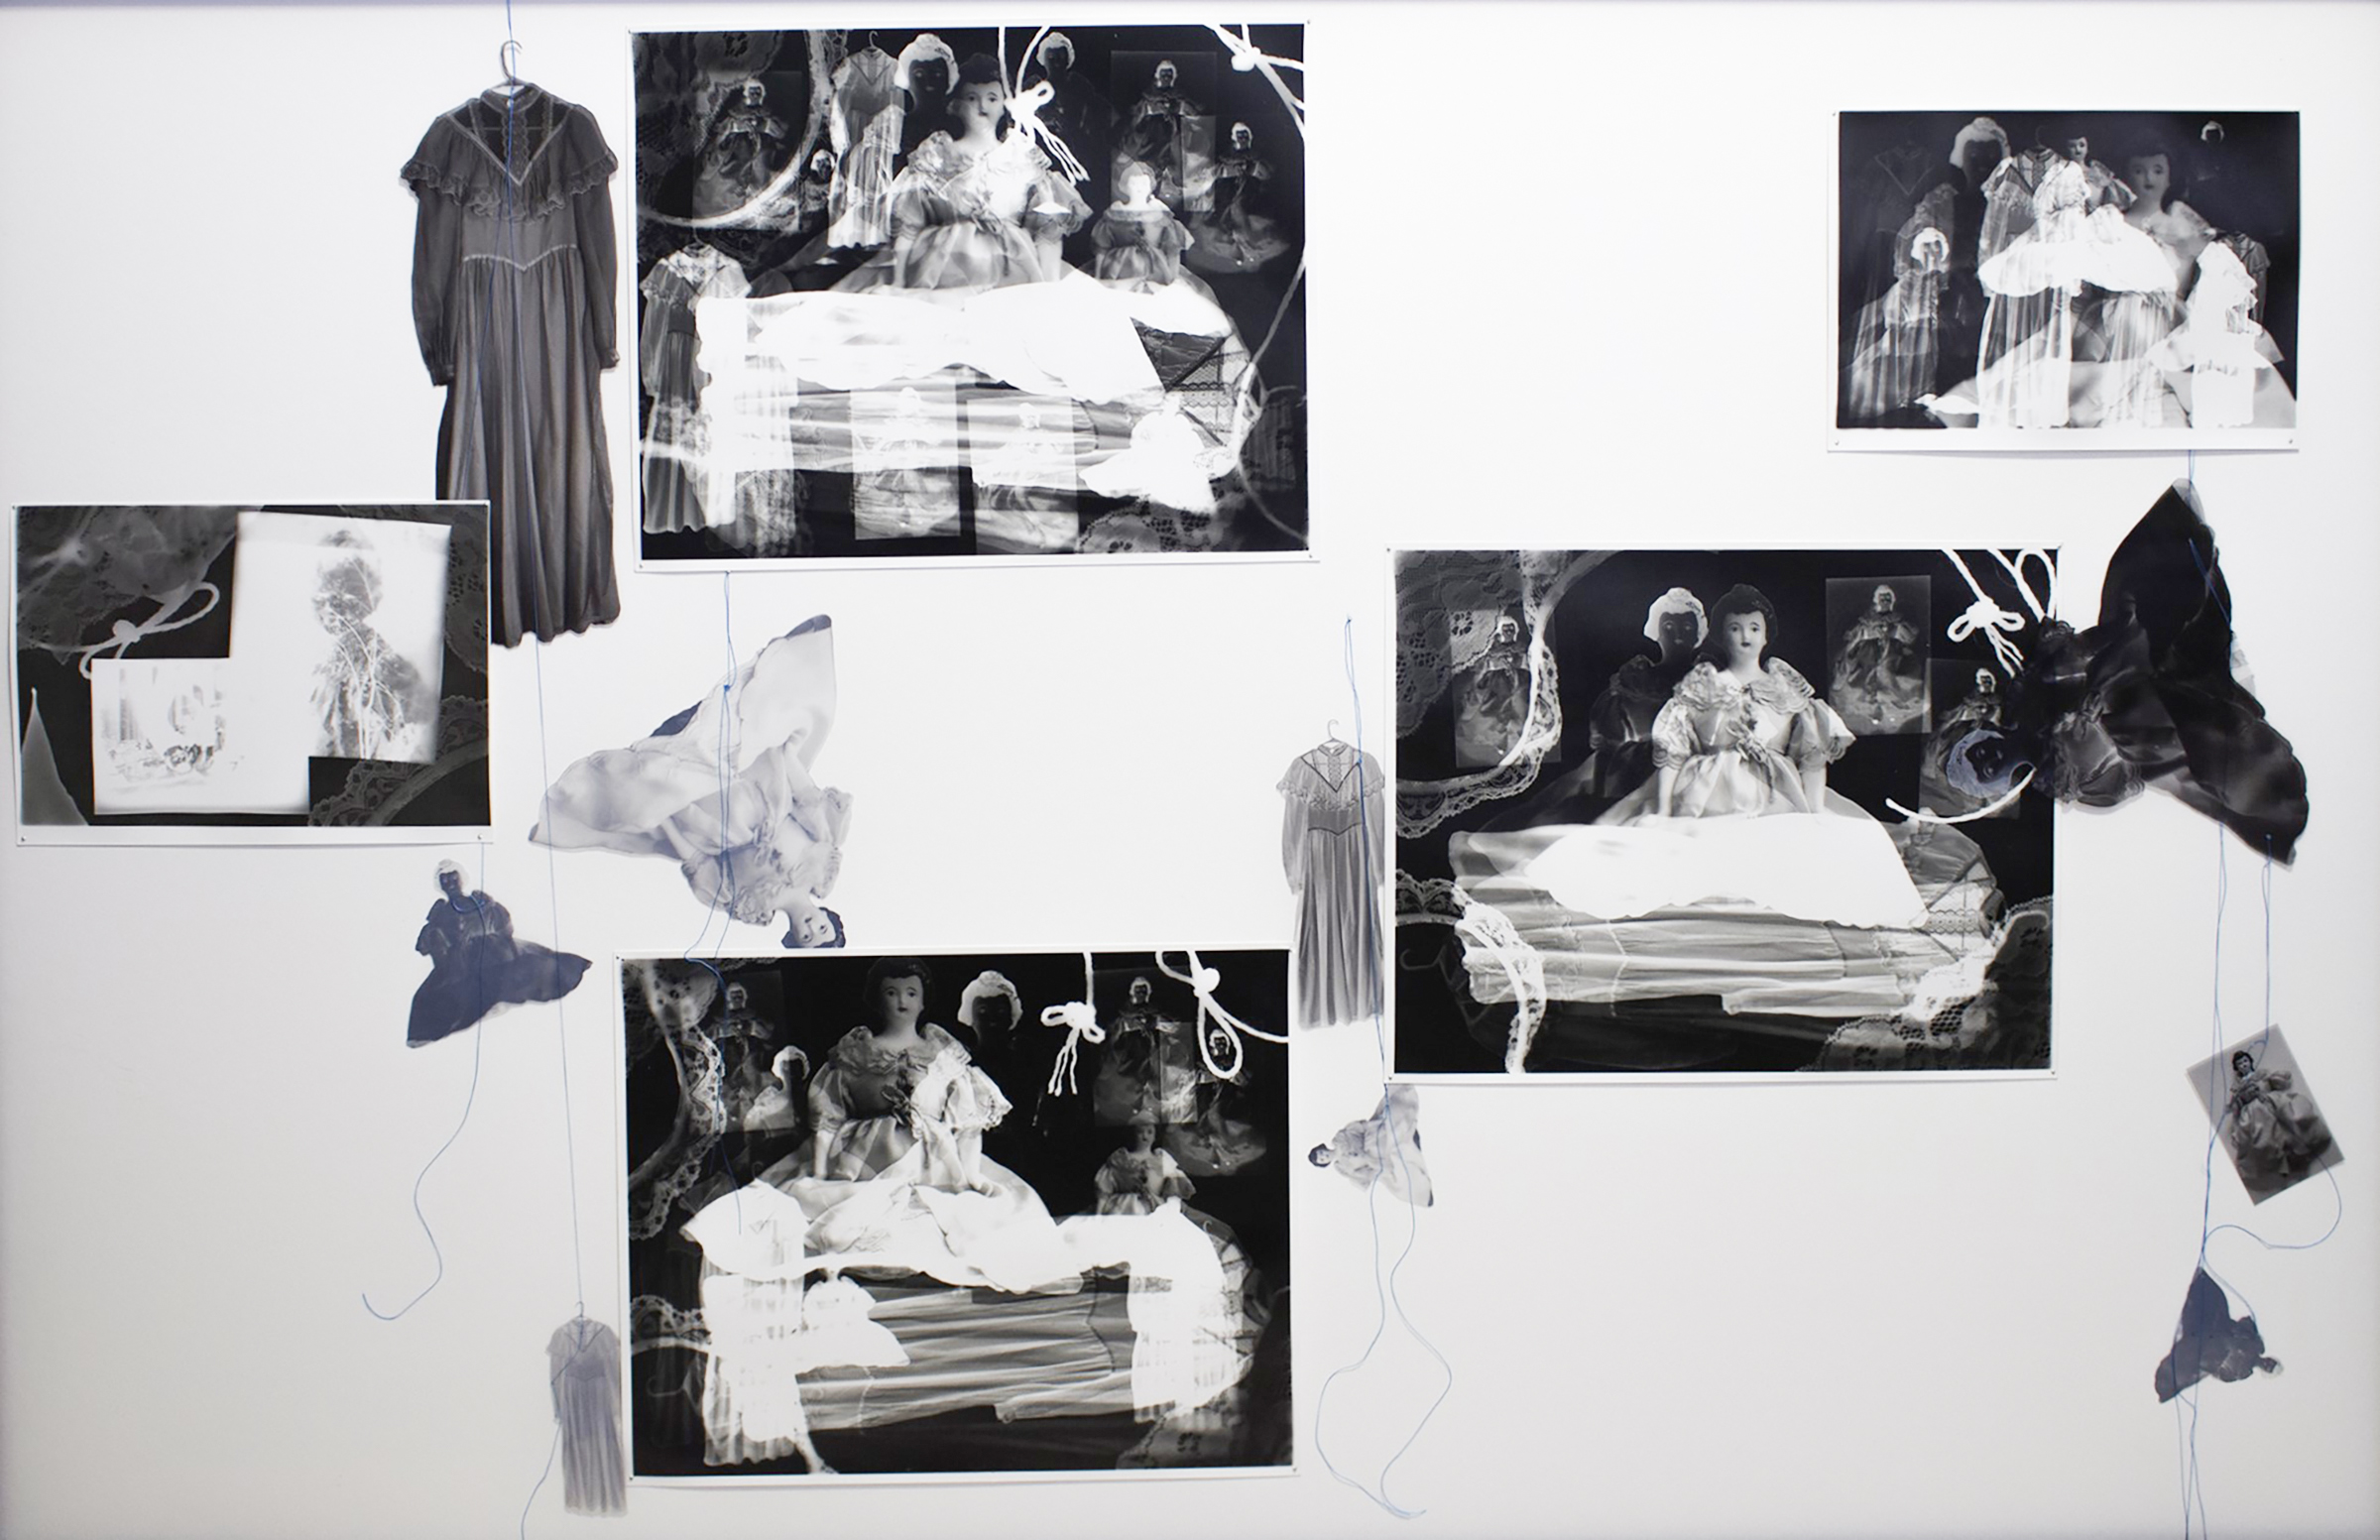 Series of black and white gelatin silver photograms arranged in one composition. Imagery consists of various sizes, both positive and negative, of dolls, dresses, and a boy, with white silhouettes of lace and fabric overlaid and surrounding them. Imagery overlaps and blends into one another. Outside of the photograms, transparent images of dolls and dresses hangs from blue thread.